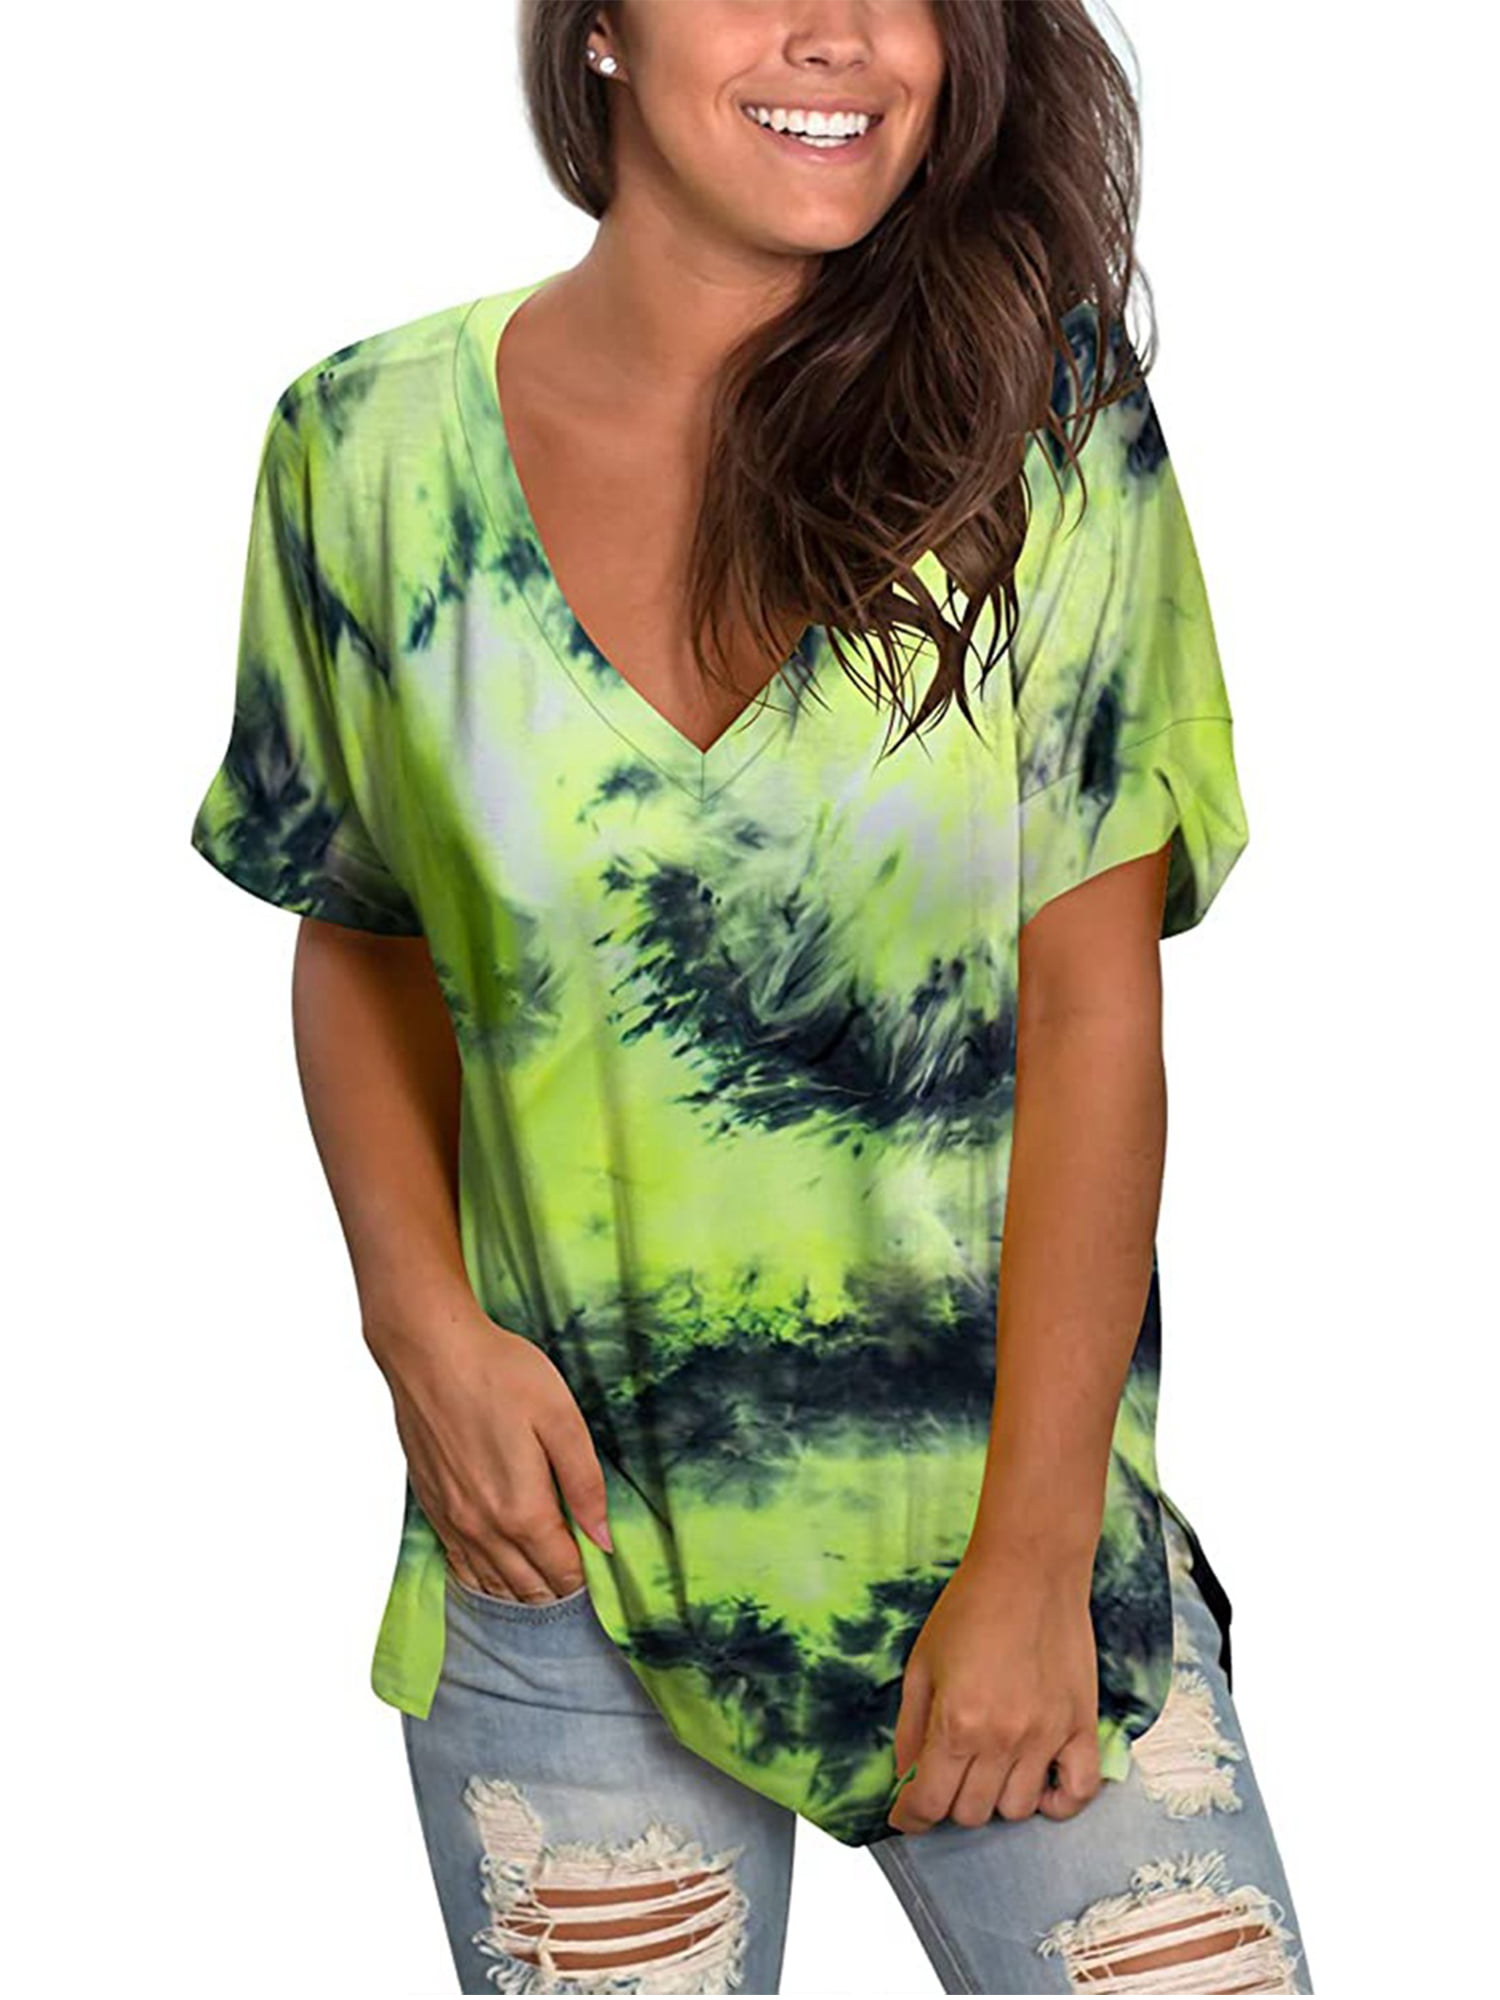 Womens Tops Women's Summer T-Shirts Casual V Neck Tie Dye Shirts Short Sleeve Loose Tops Casual Womens Tops 